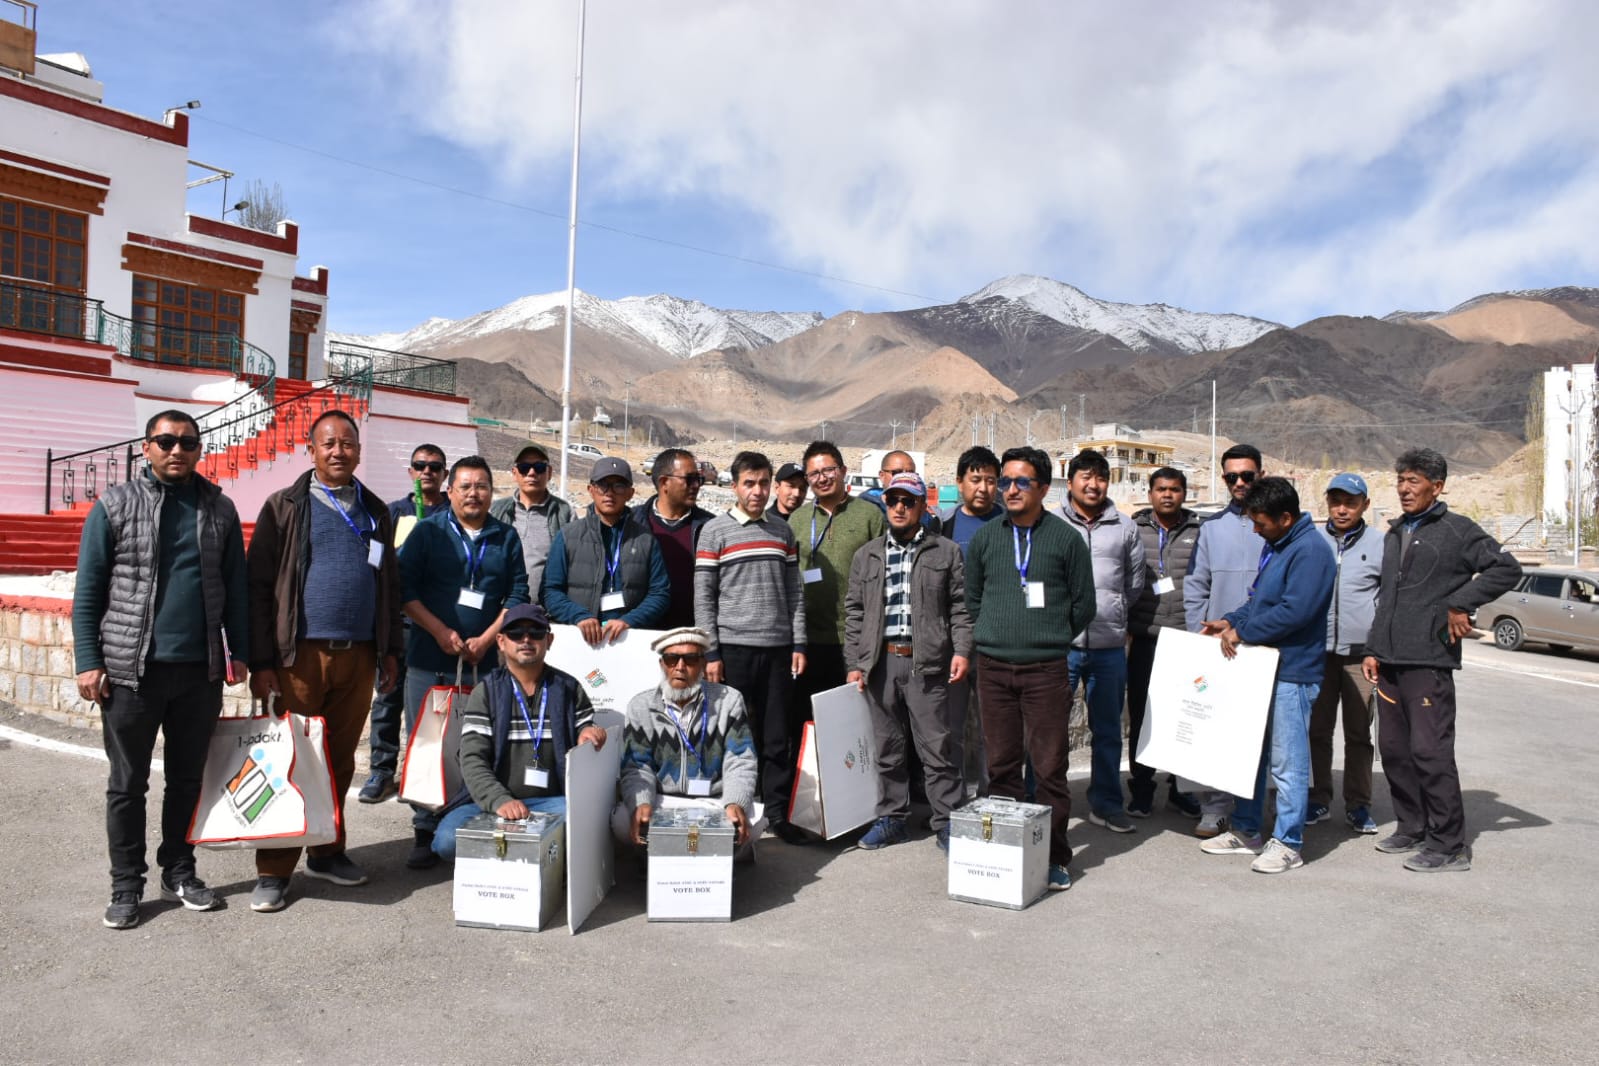 Assistant Returning Officer, Postal Ballot flags off 7 polling teams of Absentee Voter Senior Citizen & Absentee Voter Person with Disabilities (AVPD) in Leh